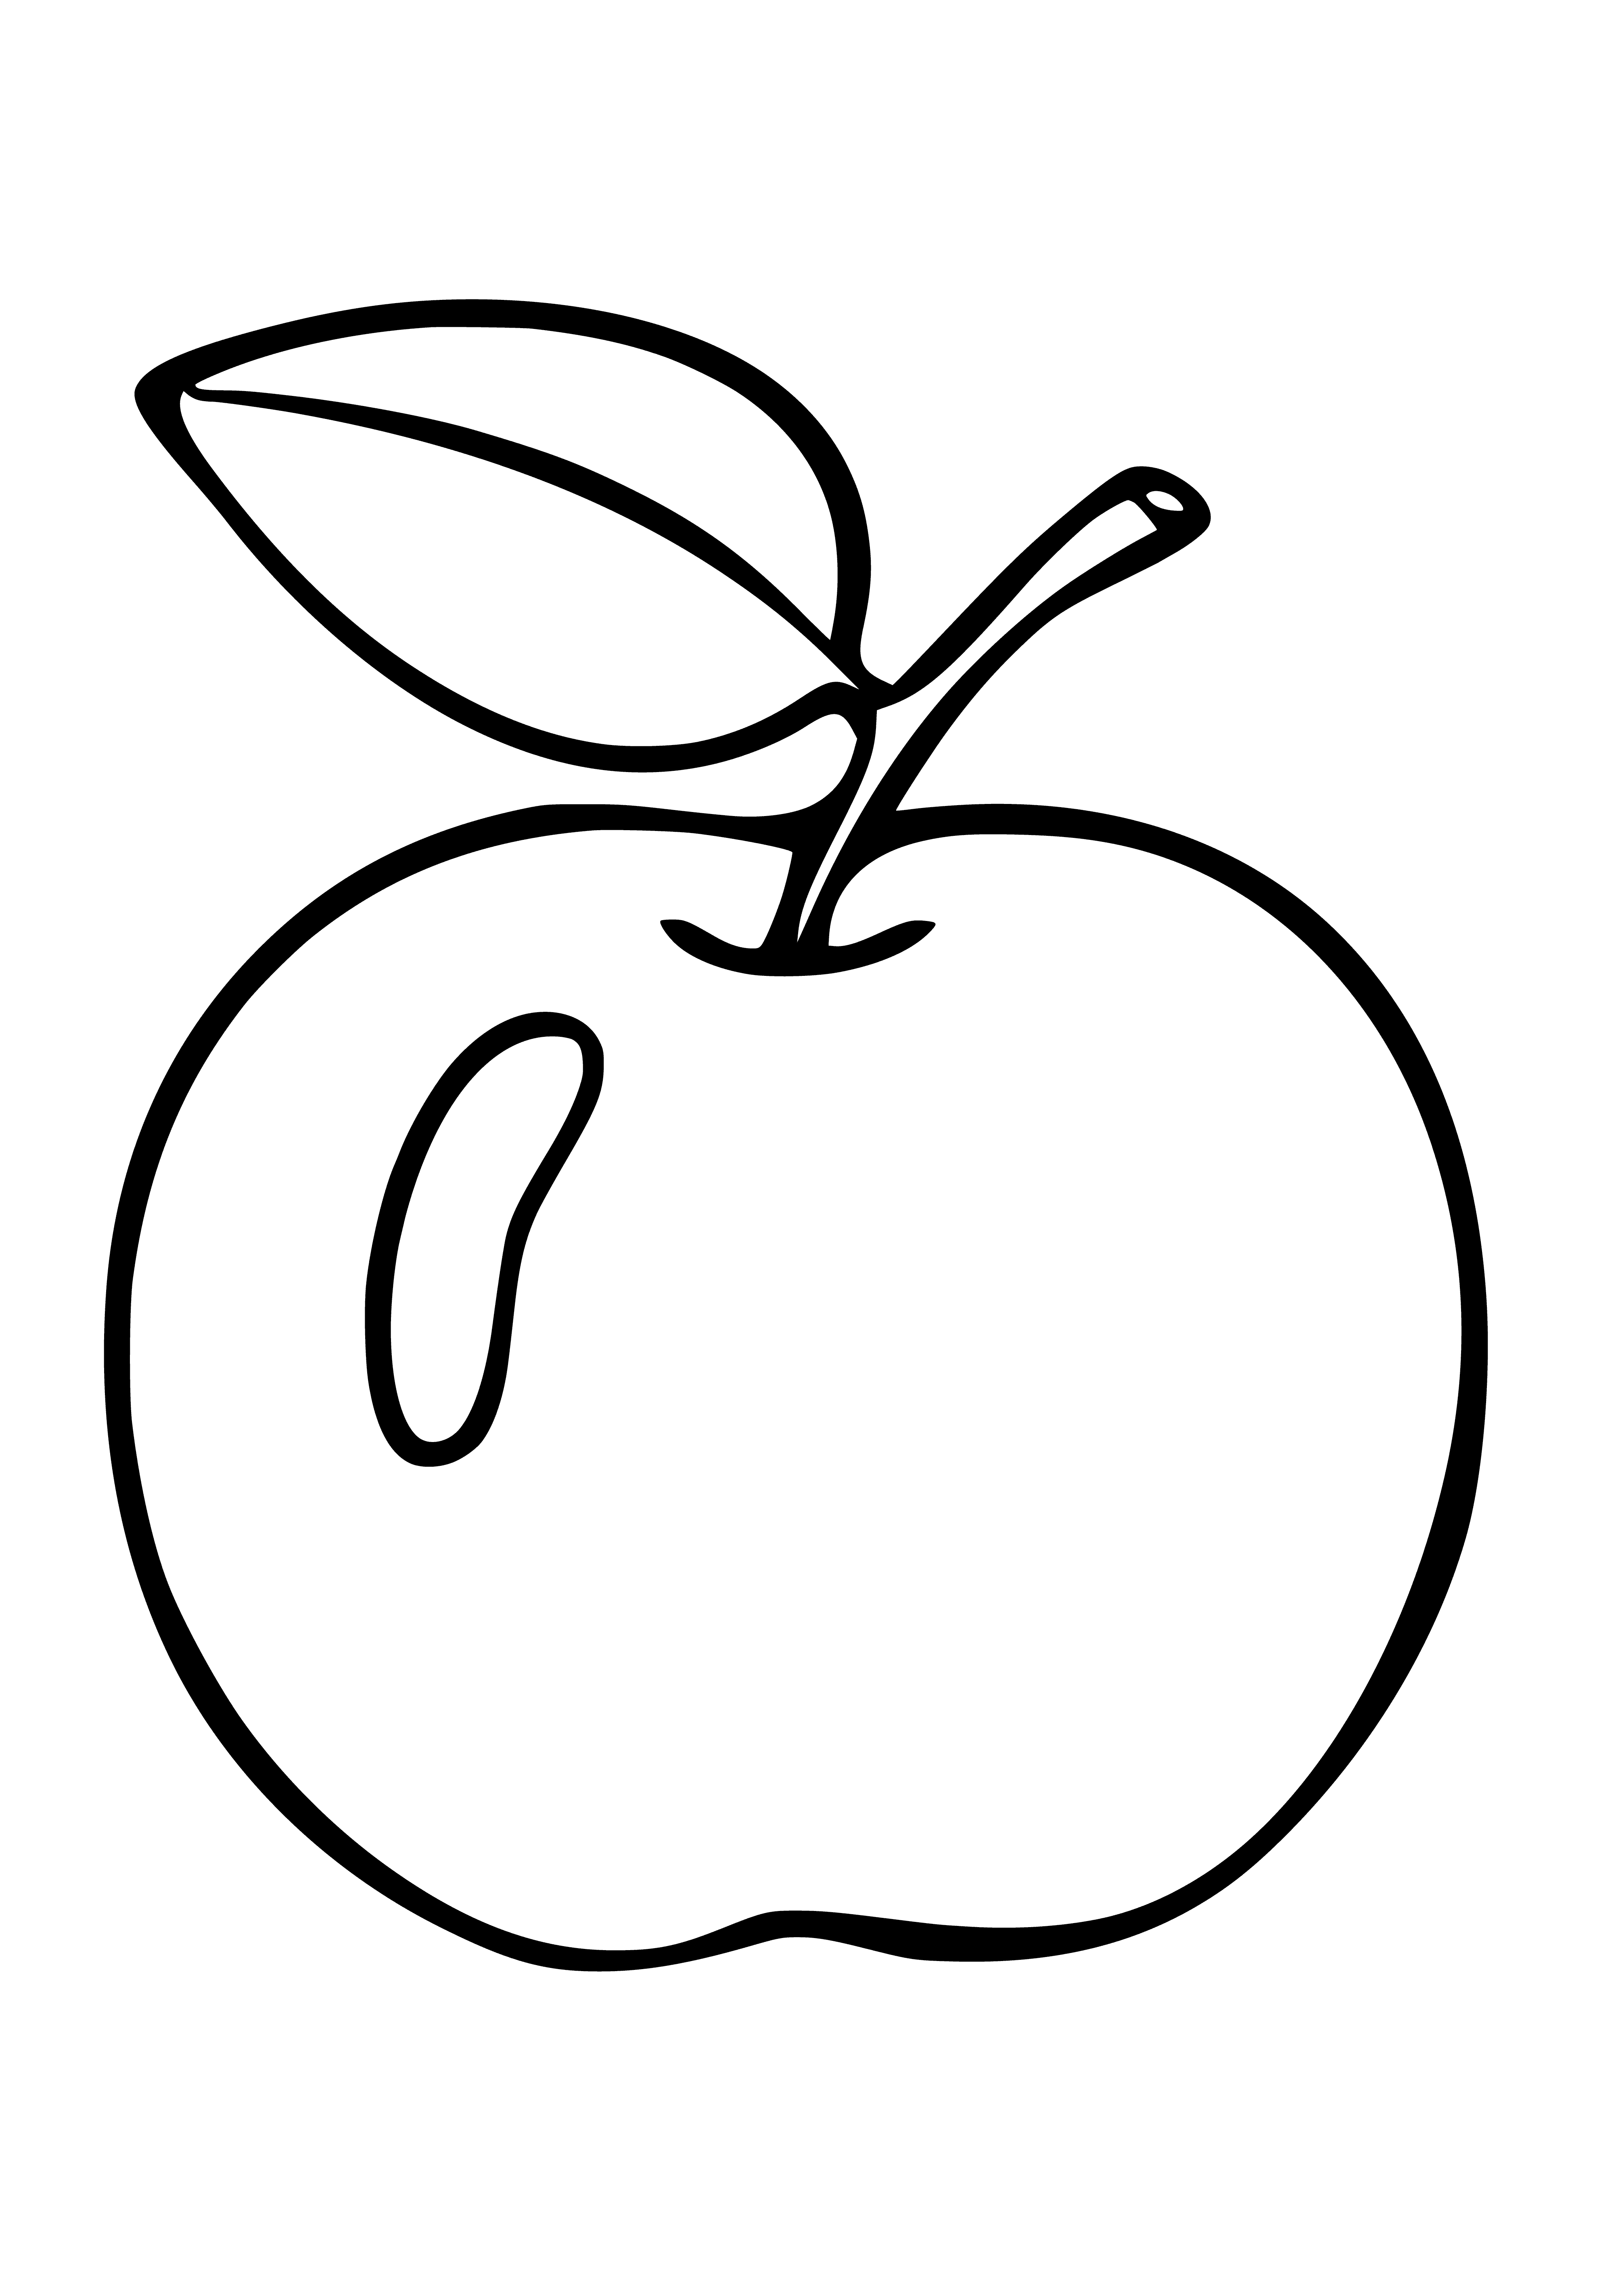 coloring page: Green apple on white background, stem with two green leaves, top has brown stem & green leaf; no colors on apple.